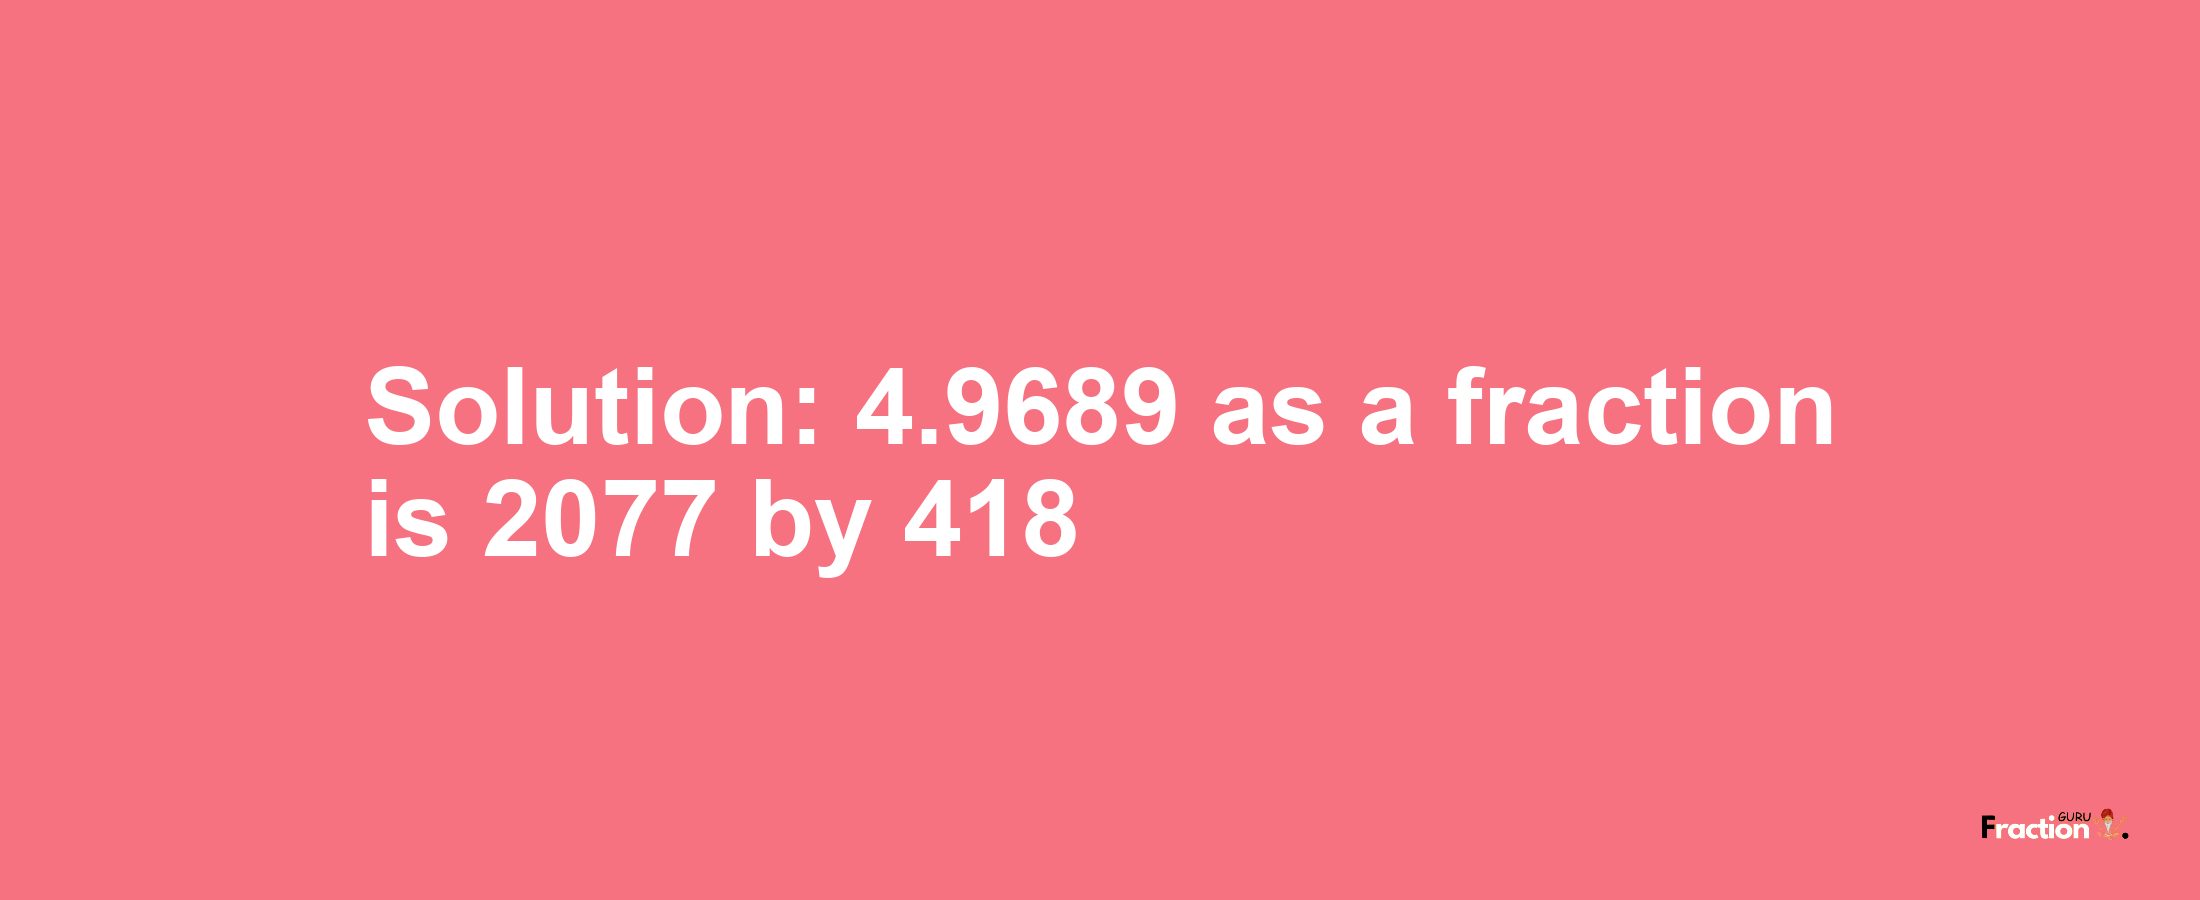 Solution:4.9689 as a fraction is 2077/418